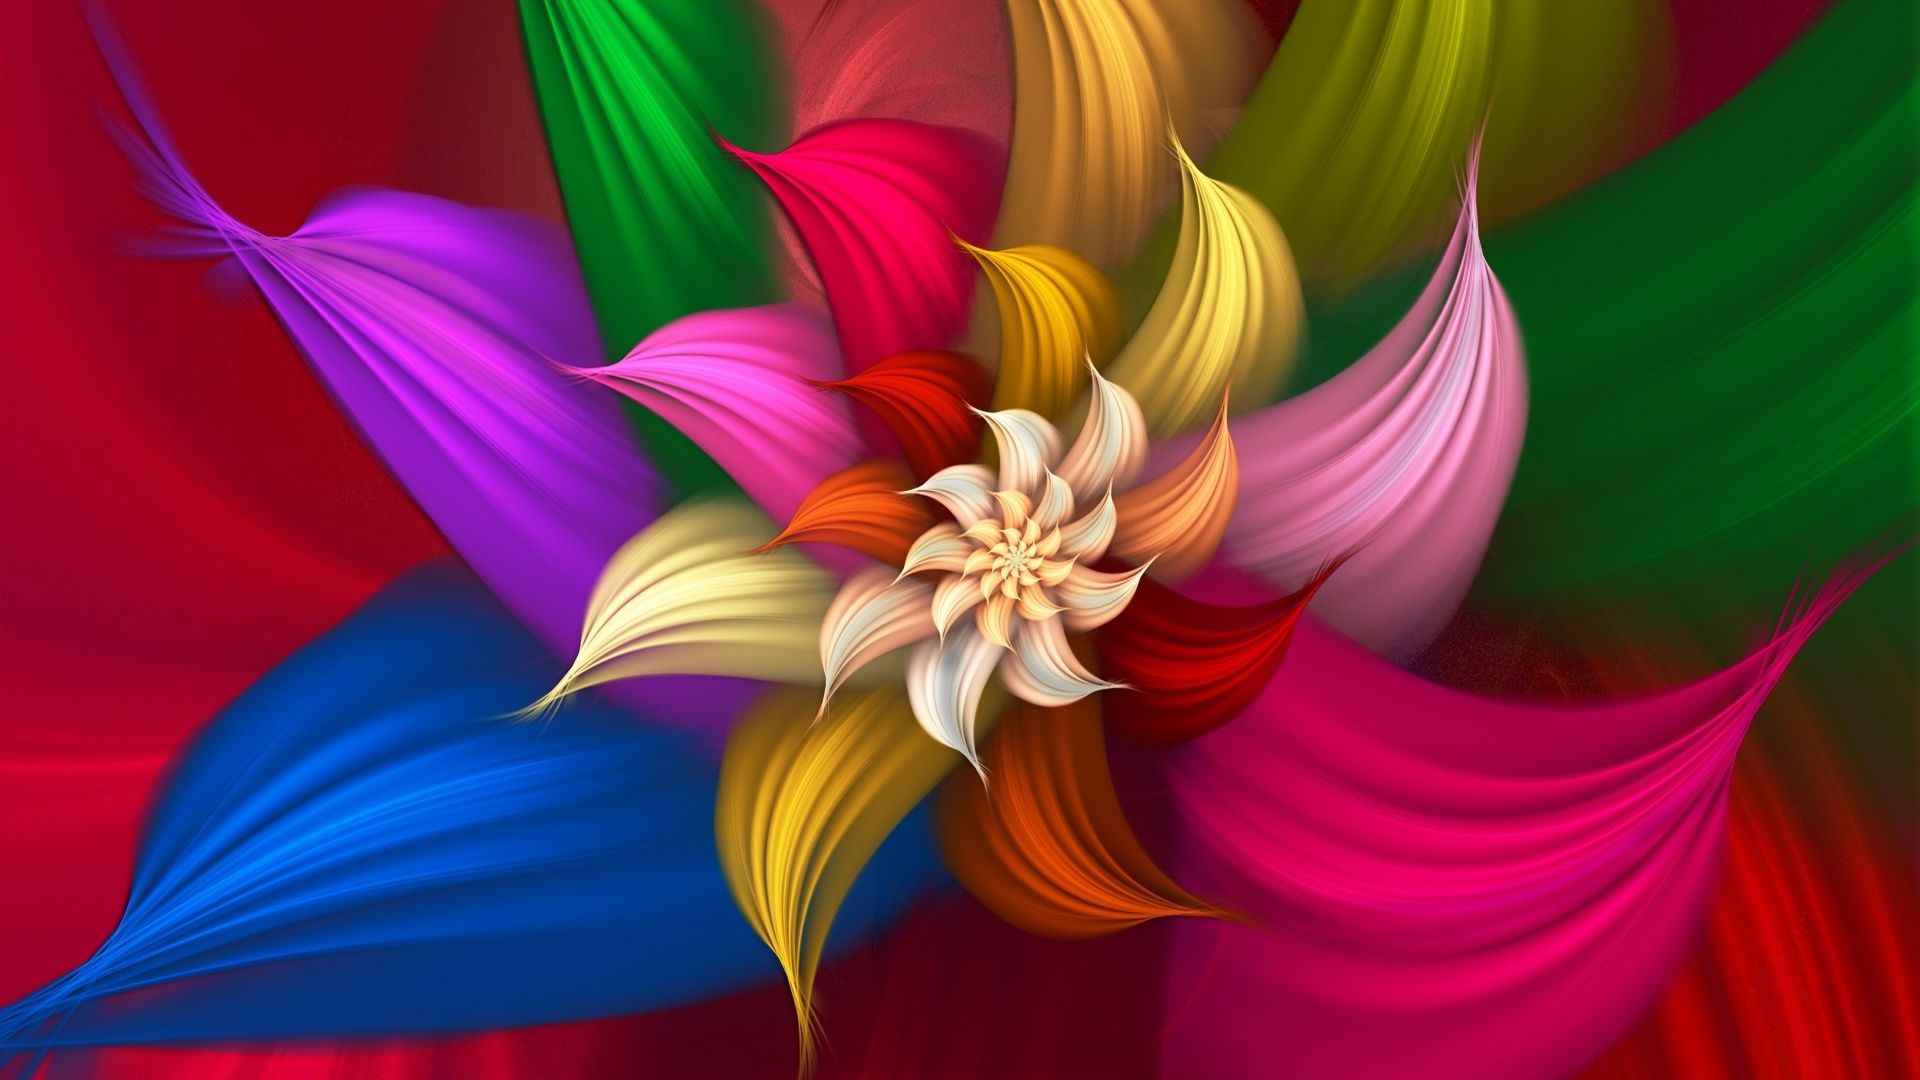 Abstract flowers paint wallpaper